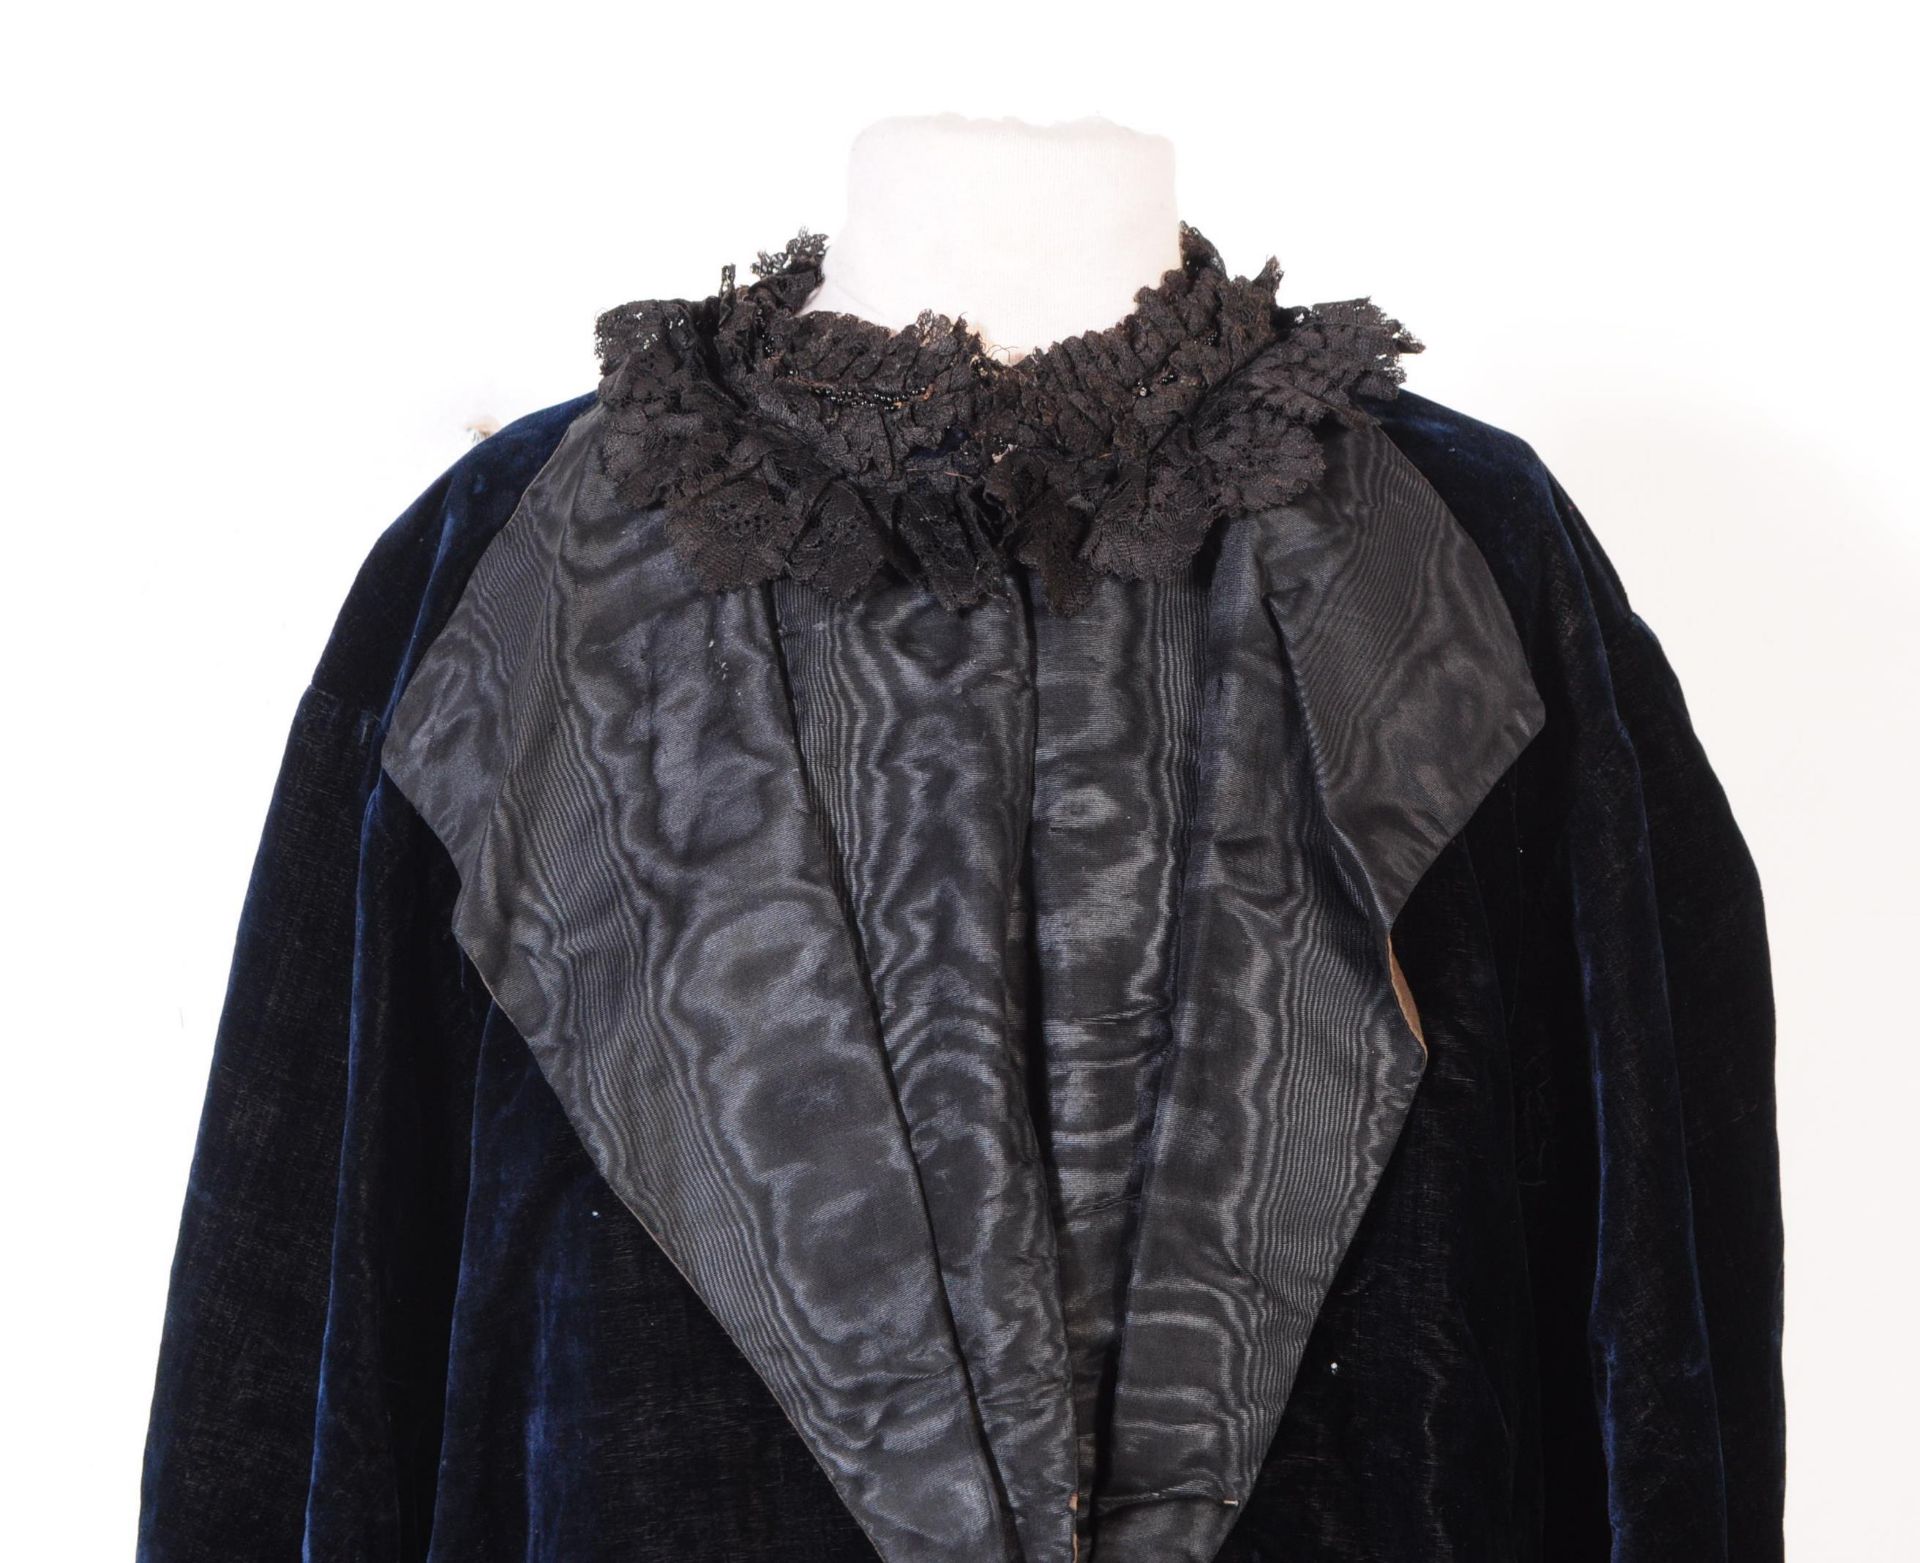 TWO VICTORIAN CLOTHING ITEMS - VELVET CAPE & SHIRT - Image 6 of 12